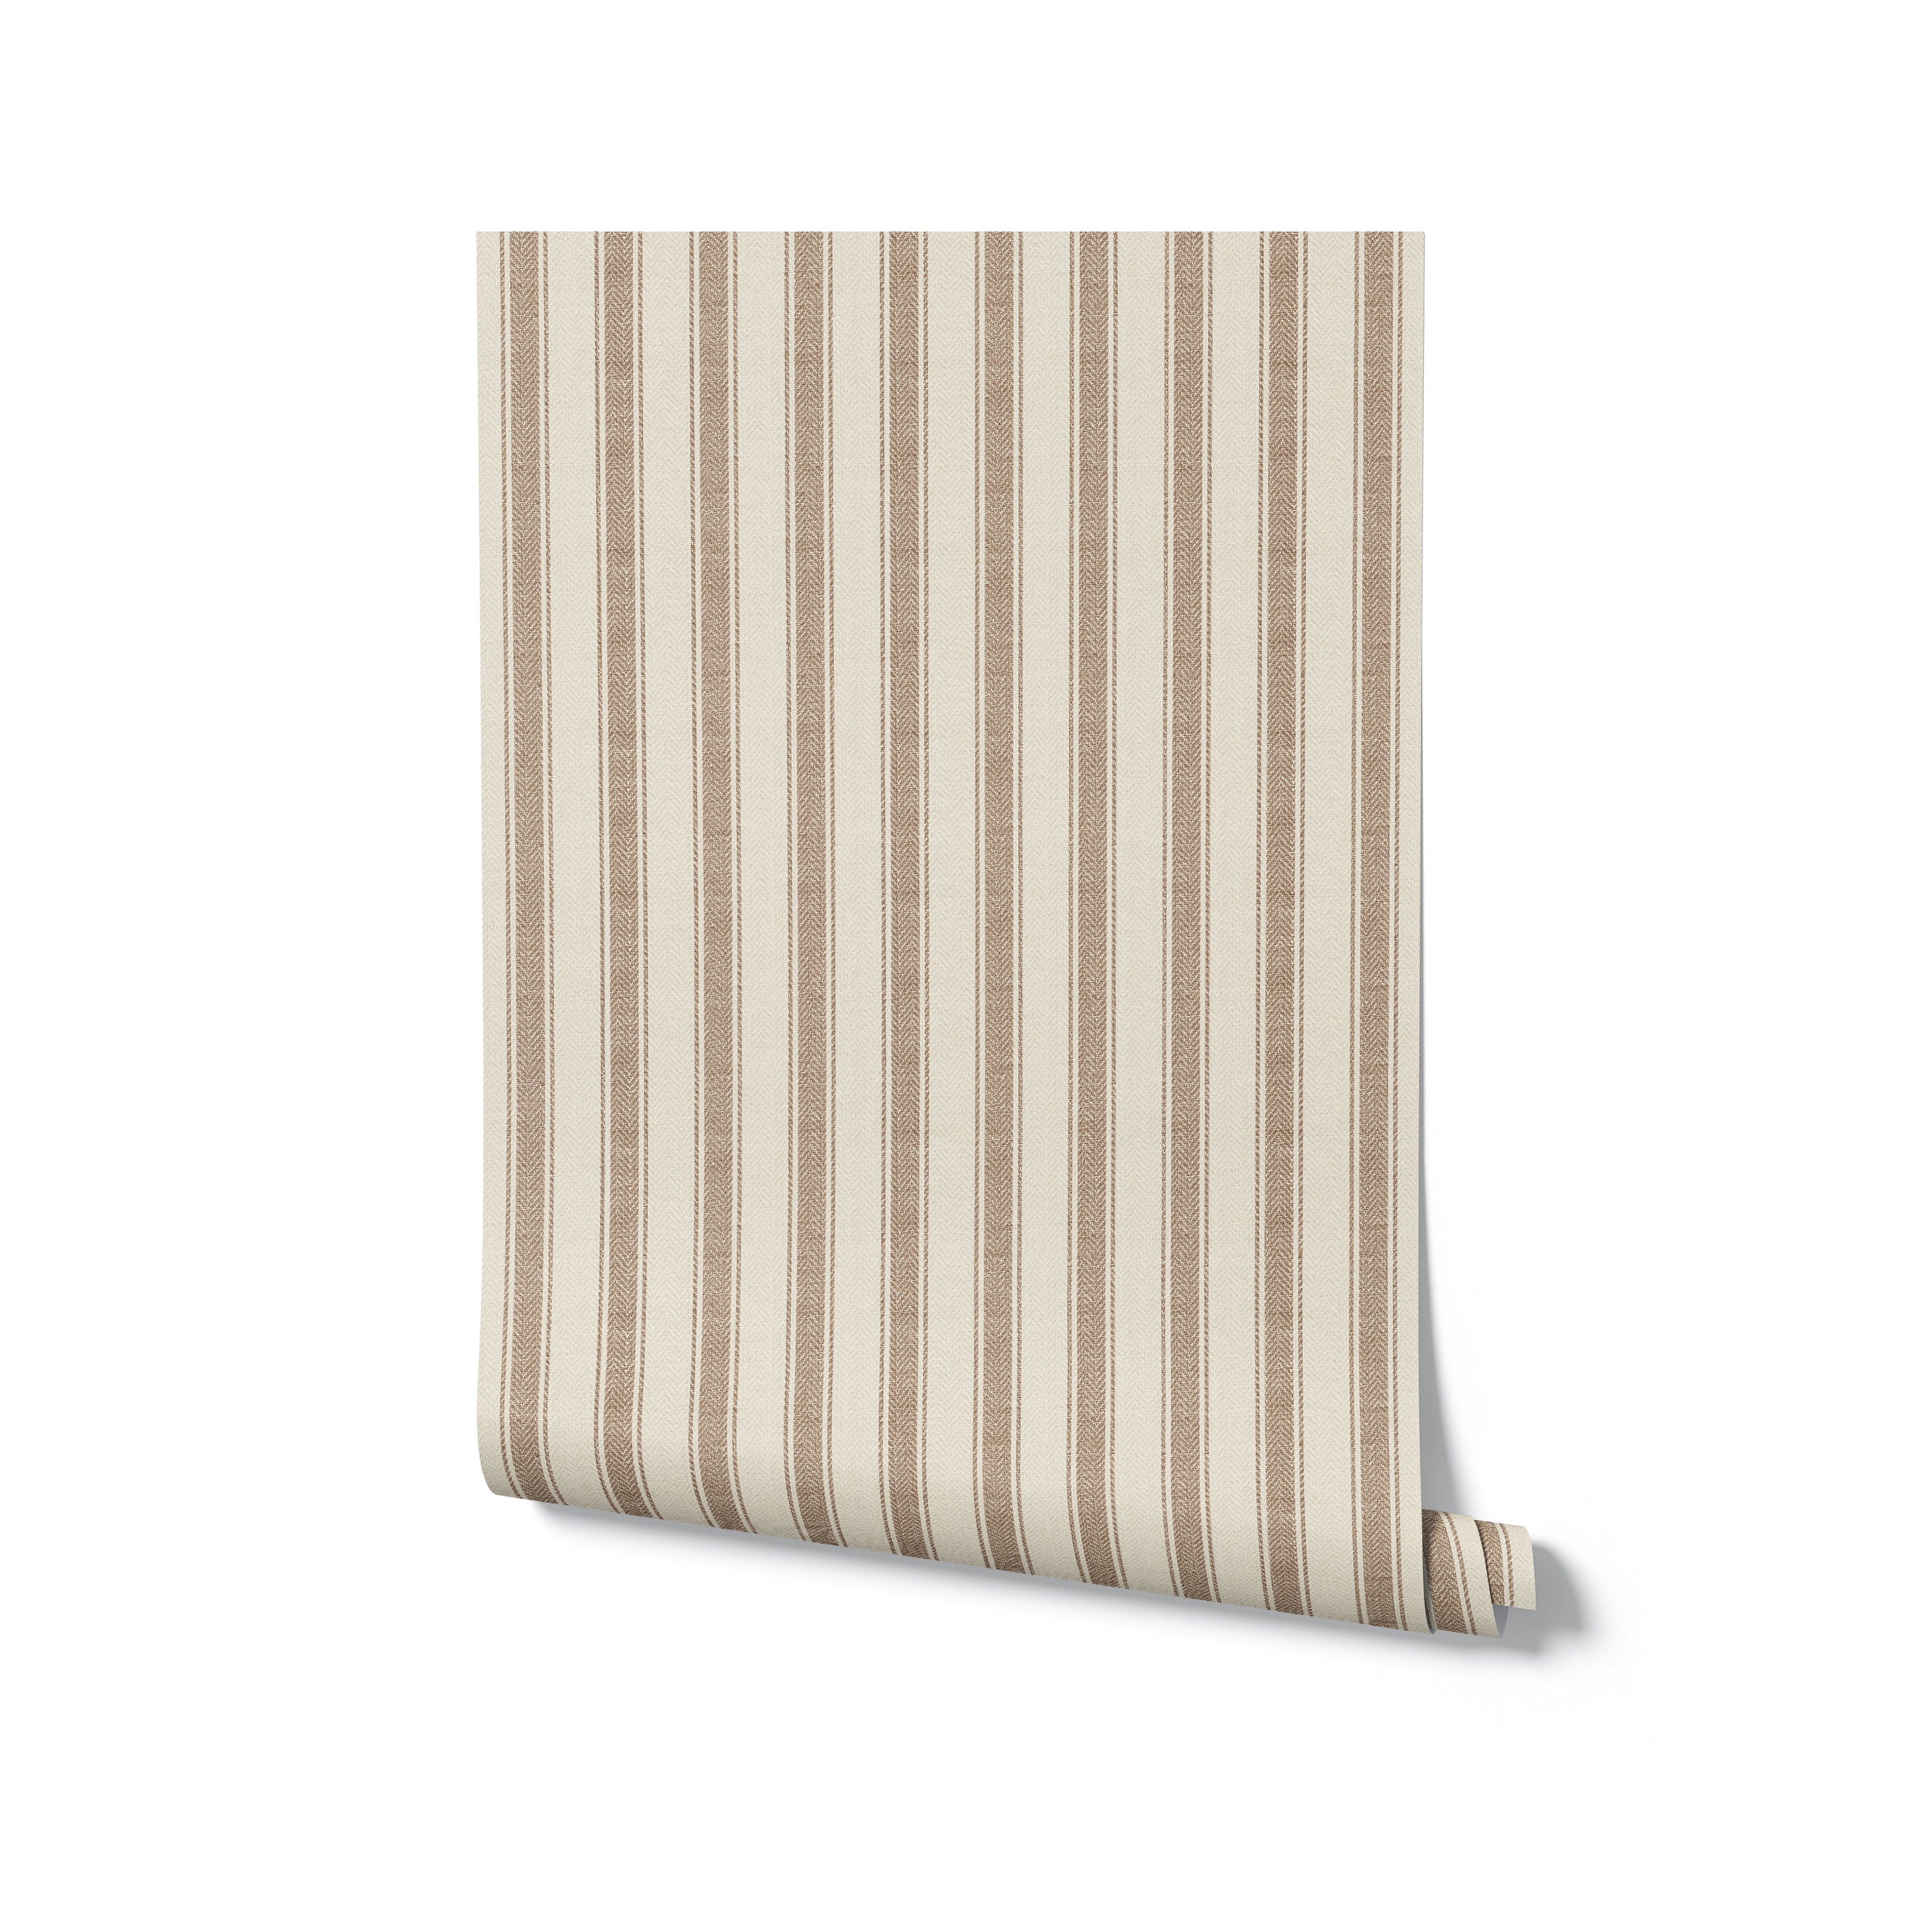 A roll of Striped Fabric Wallpaper presented against a white background, showcasing the gentle tan and cream stripes that offer a sophisticated fabric-like texture, perfect for creating a statement wall or a complete room makeover